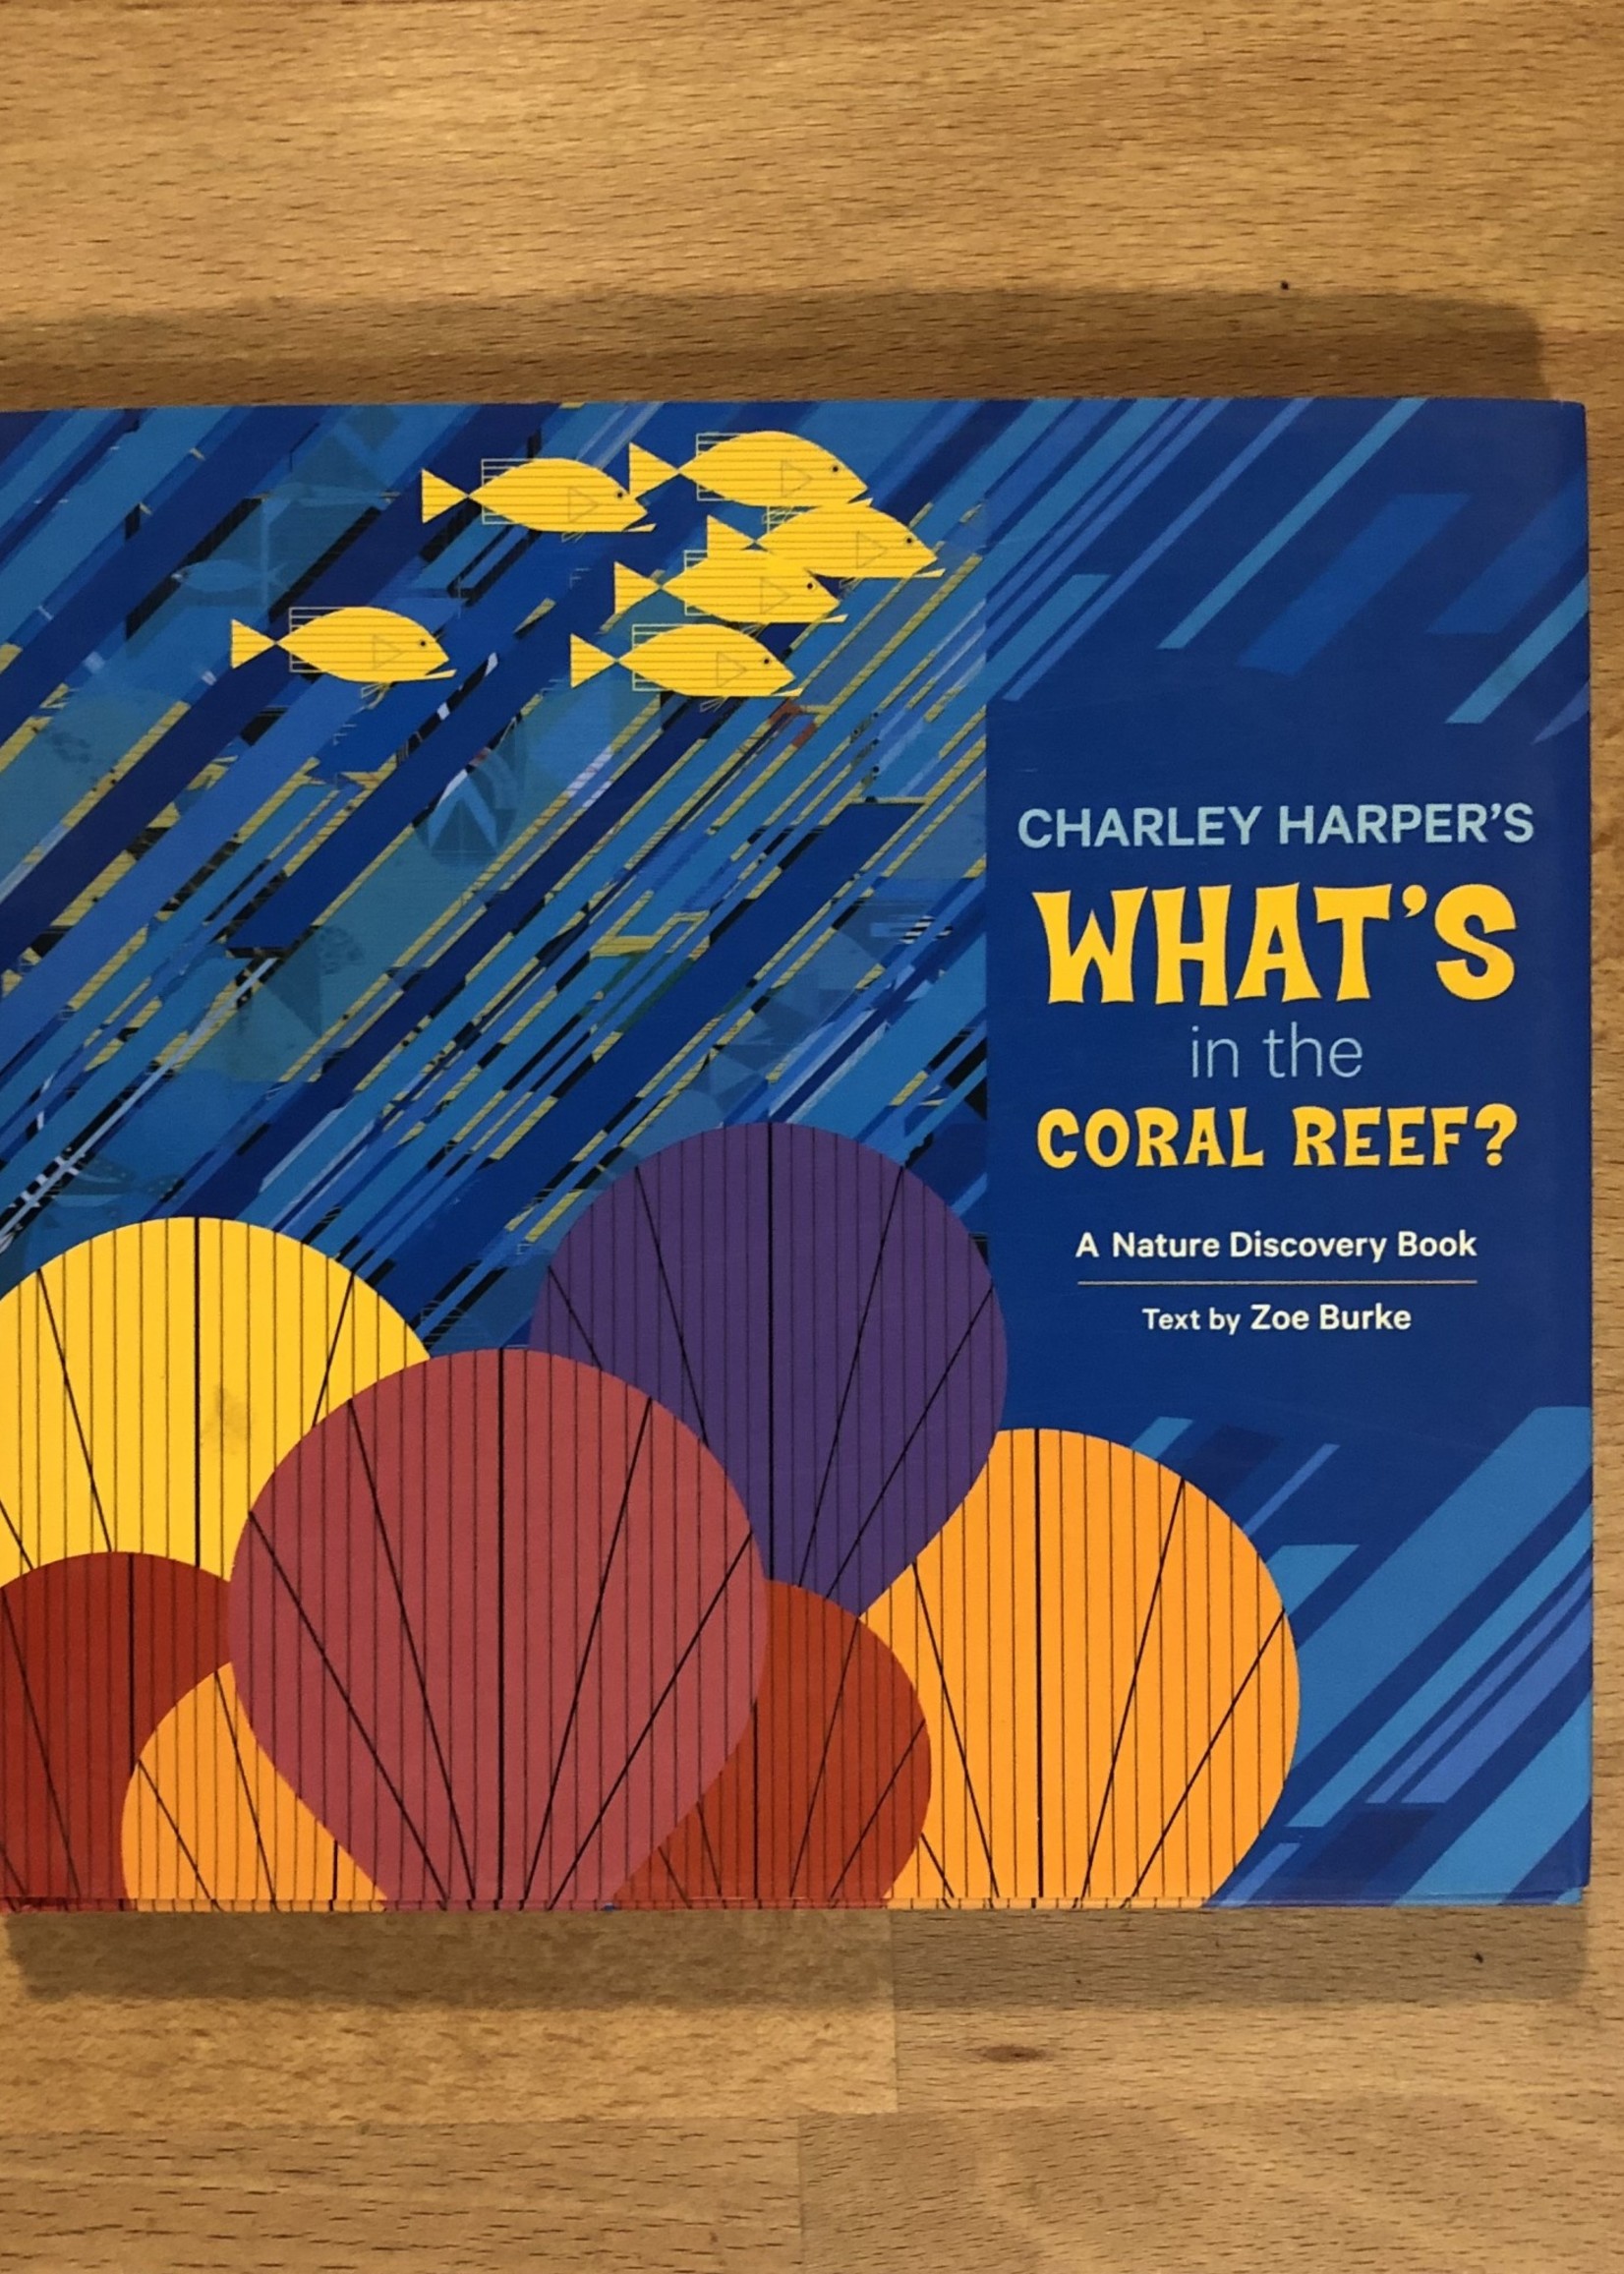 Book - Charlie harpers “whats in the coral reef”